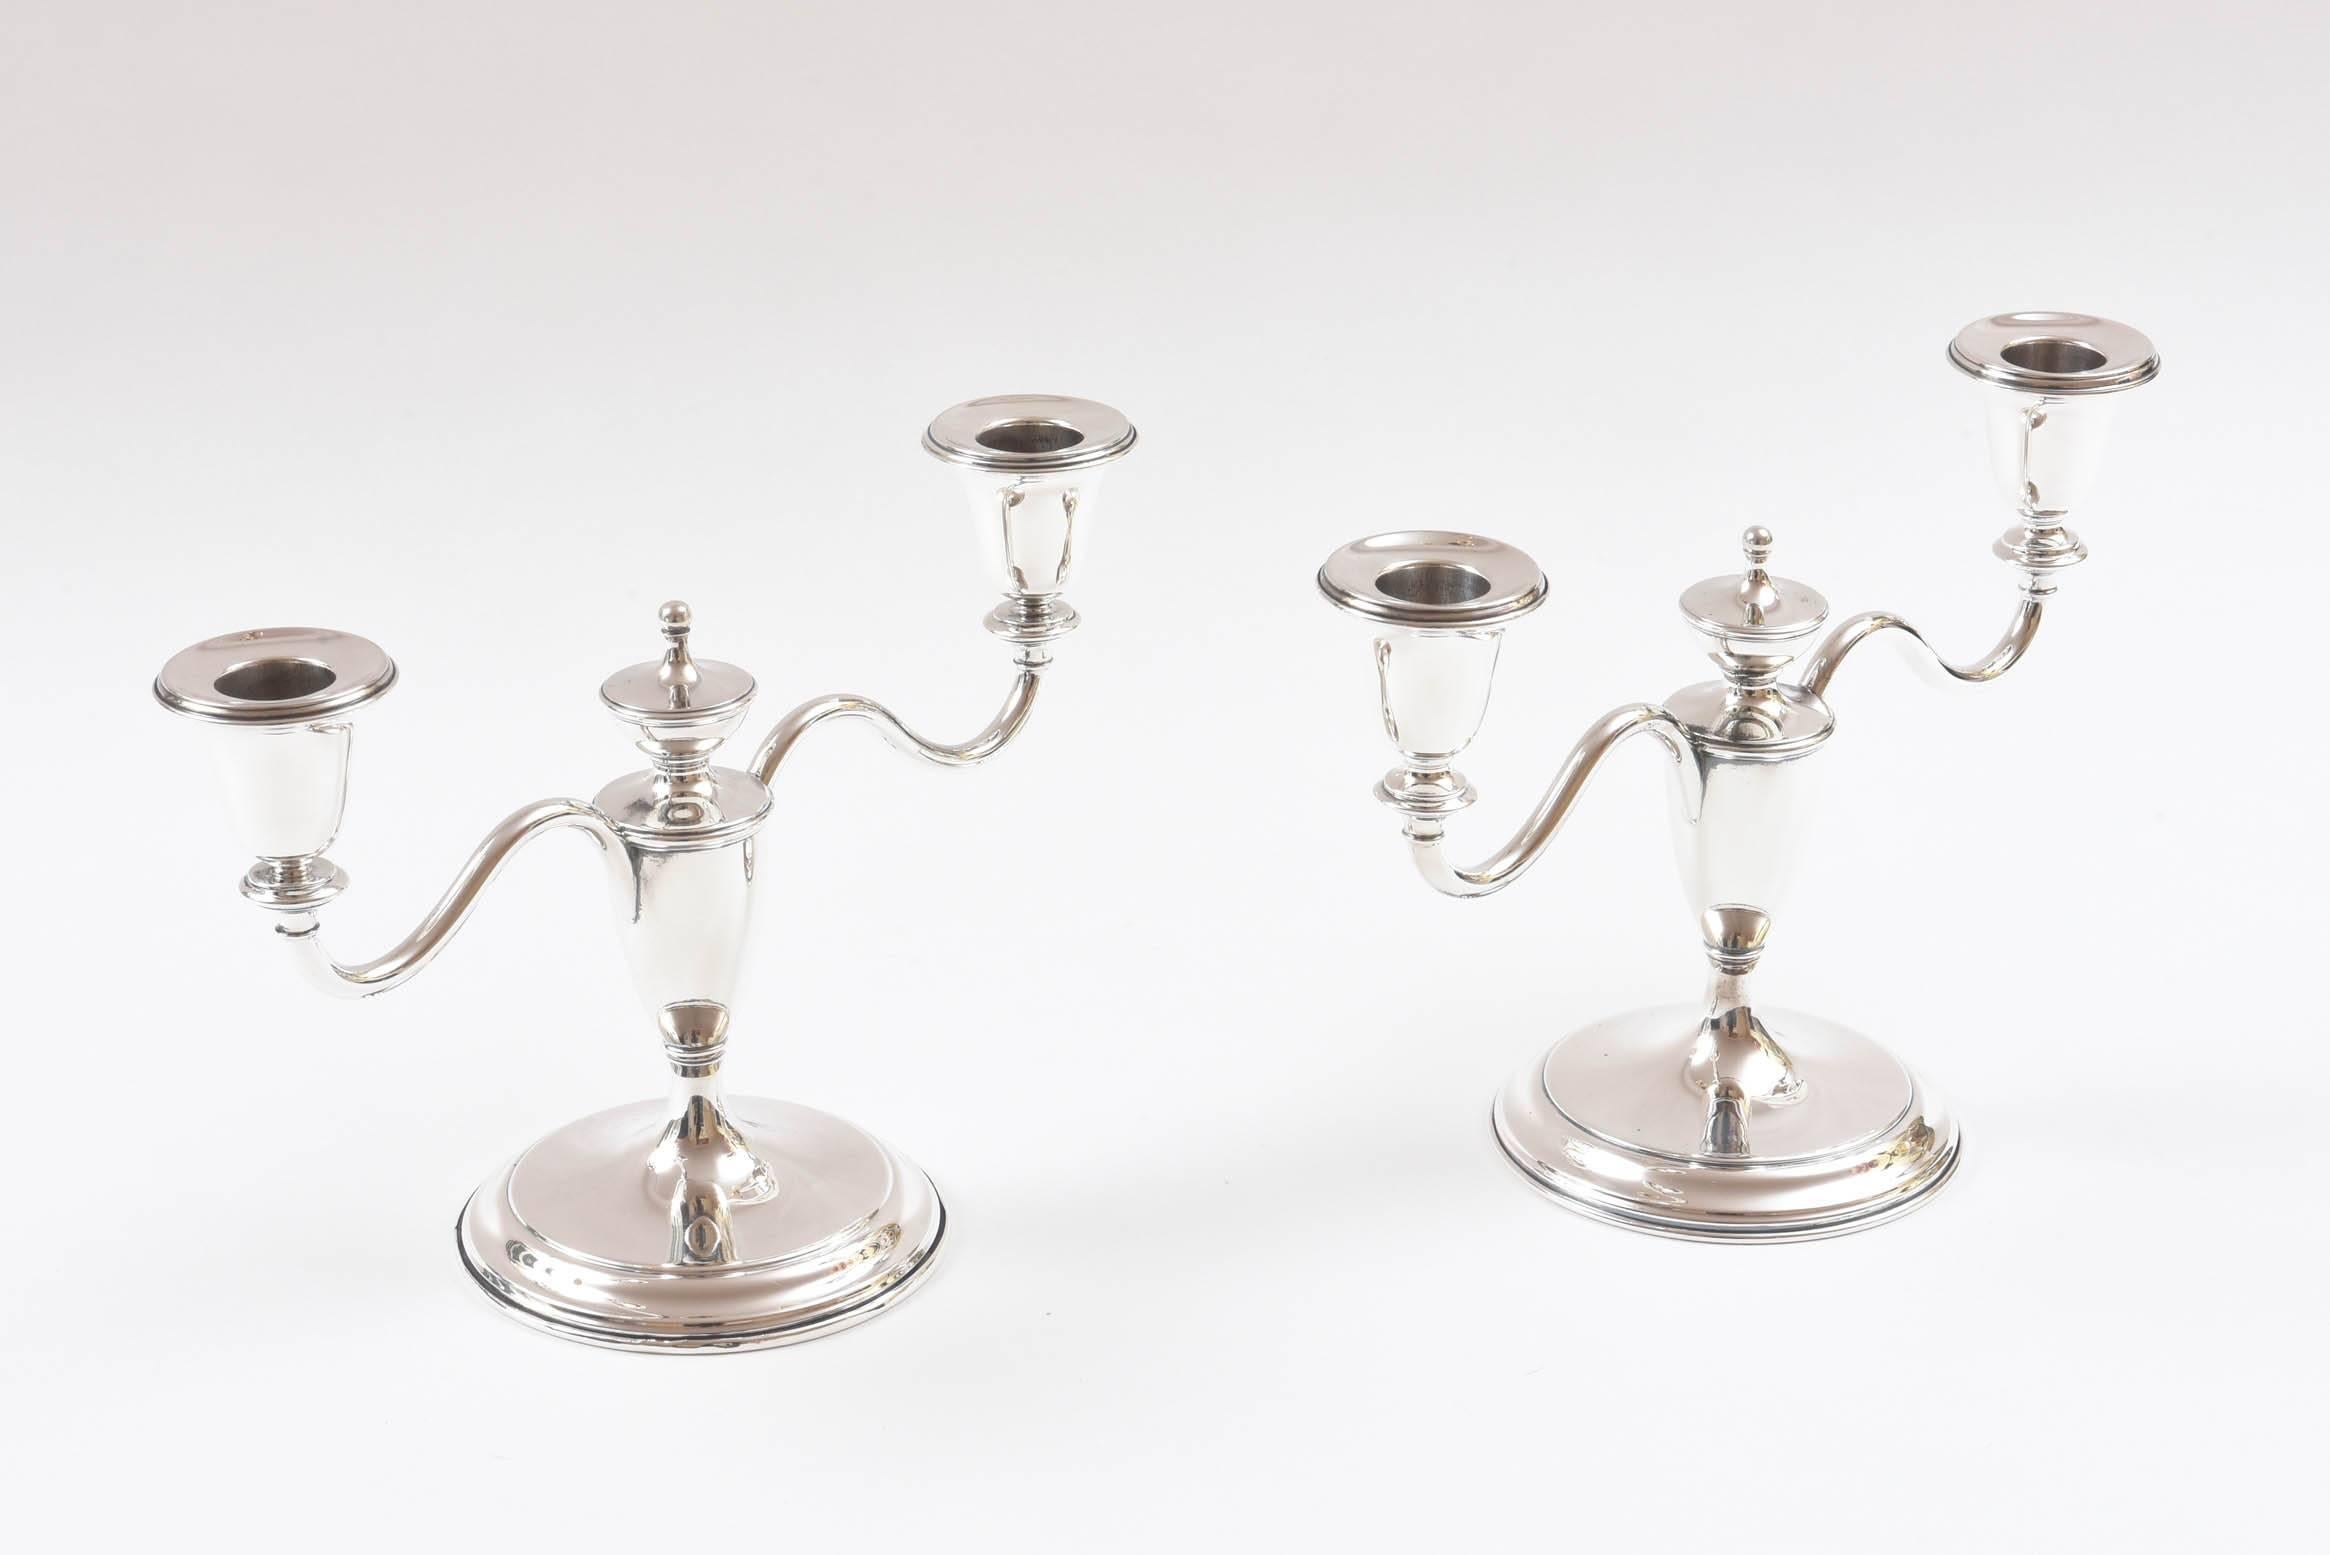 A striking pair of sterling two-arm candelabra or candlesticks by Cartier. Crisp craftsmanship featuring a classic shape and in wonderful vintage condition. Newly polished and ready for your holiday tables.